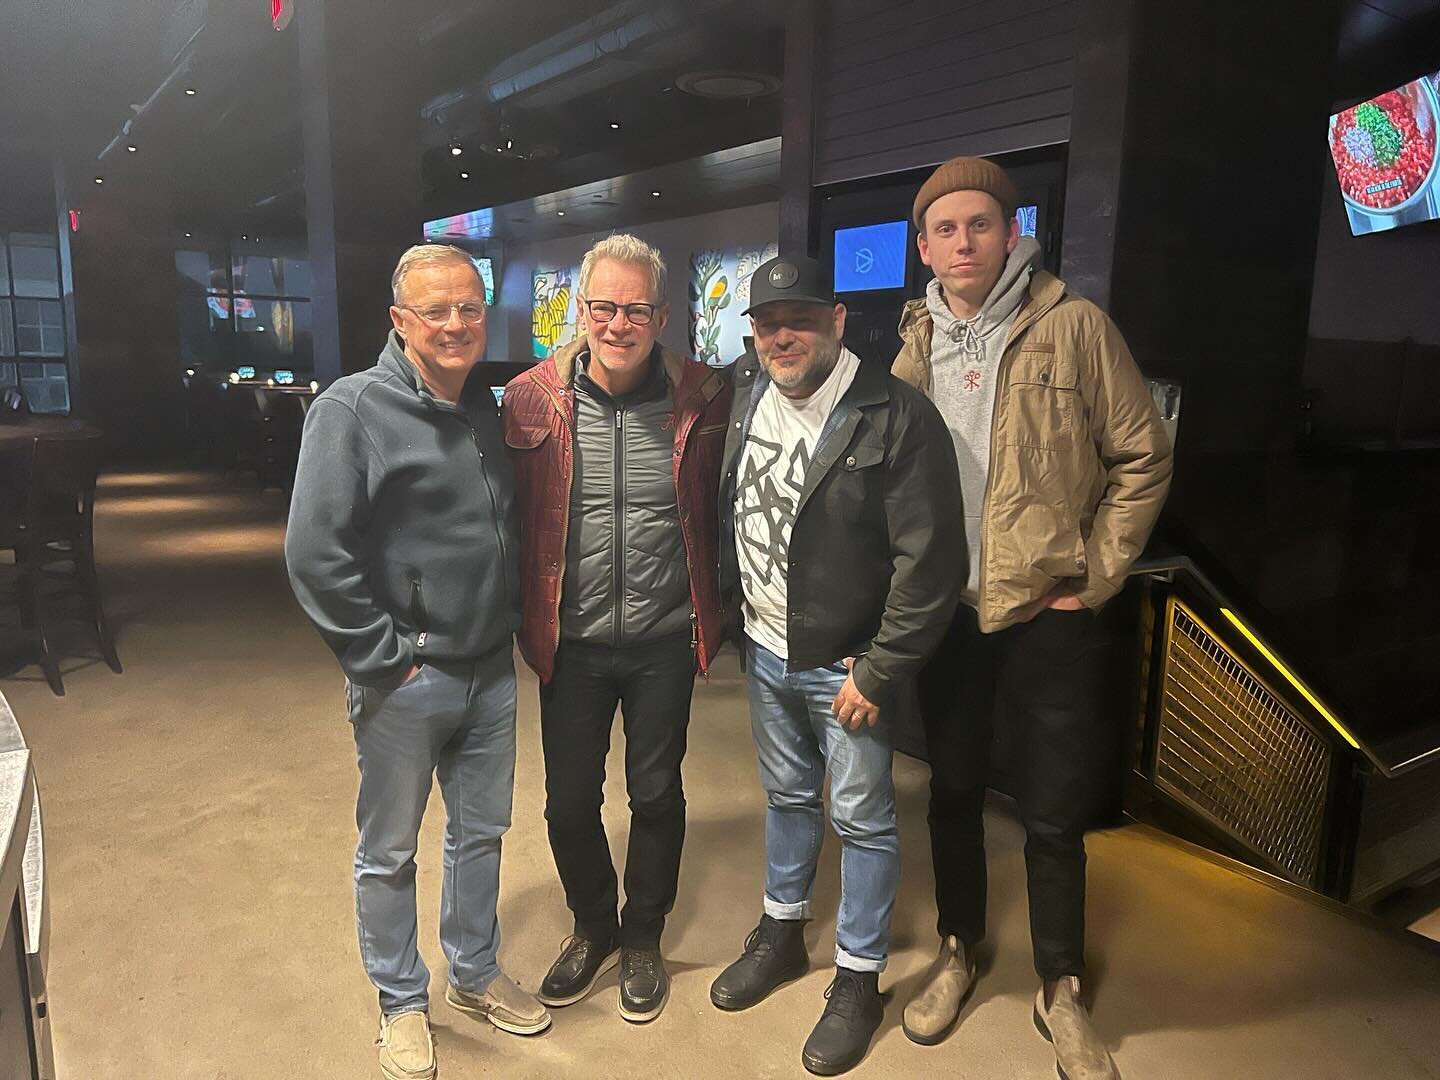 Impromptu hang with my buddy @stevencurtischapman with Paul &amp; Harold. We pick up right where we left off.